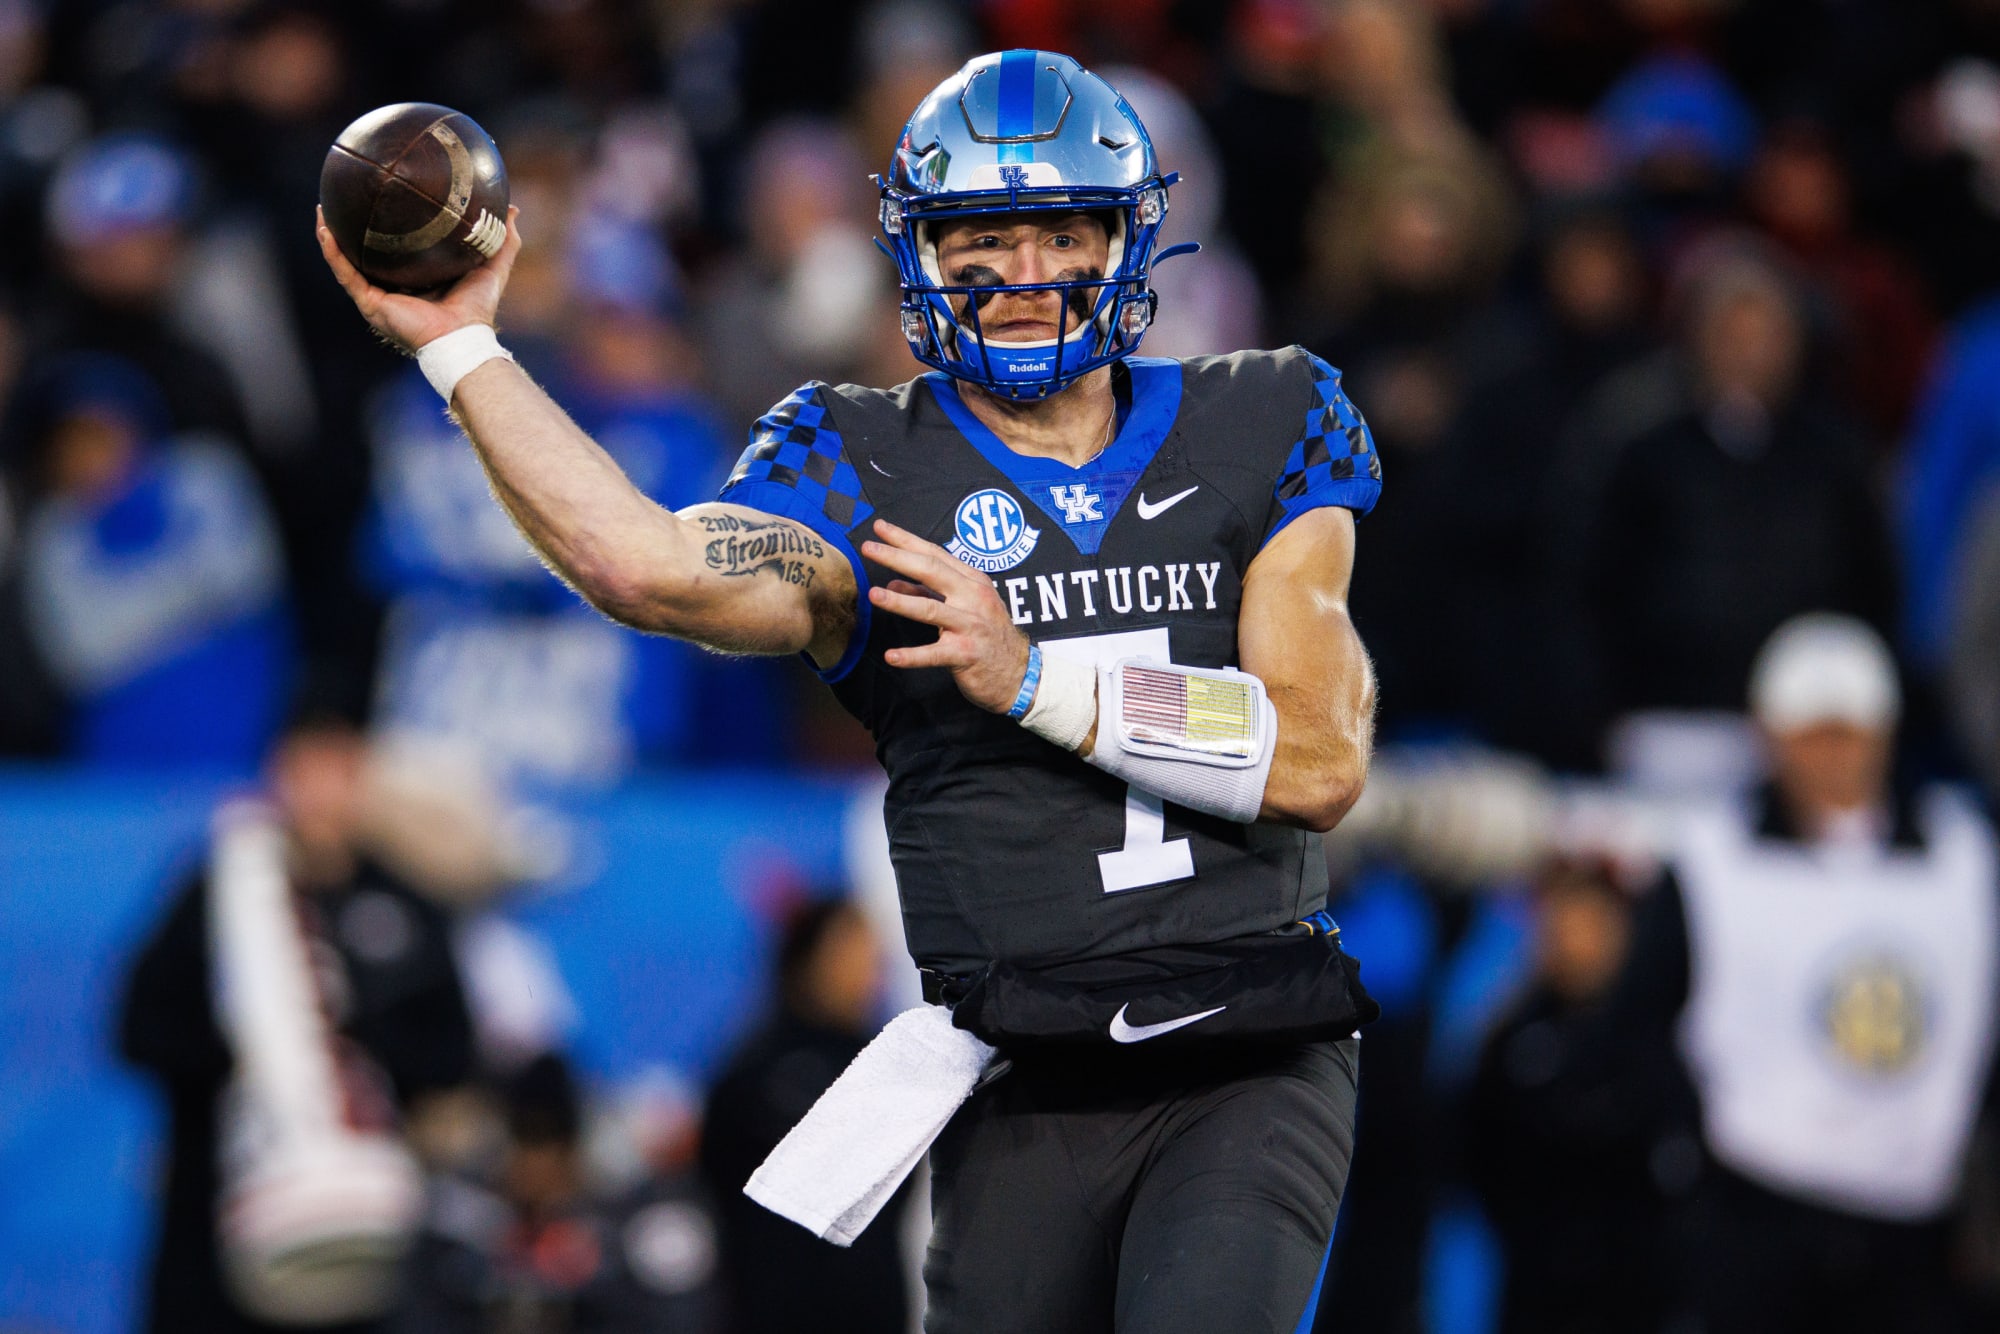 Who will be second quarterback drafted?